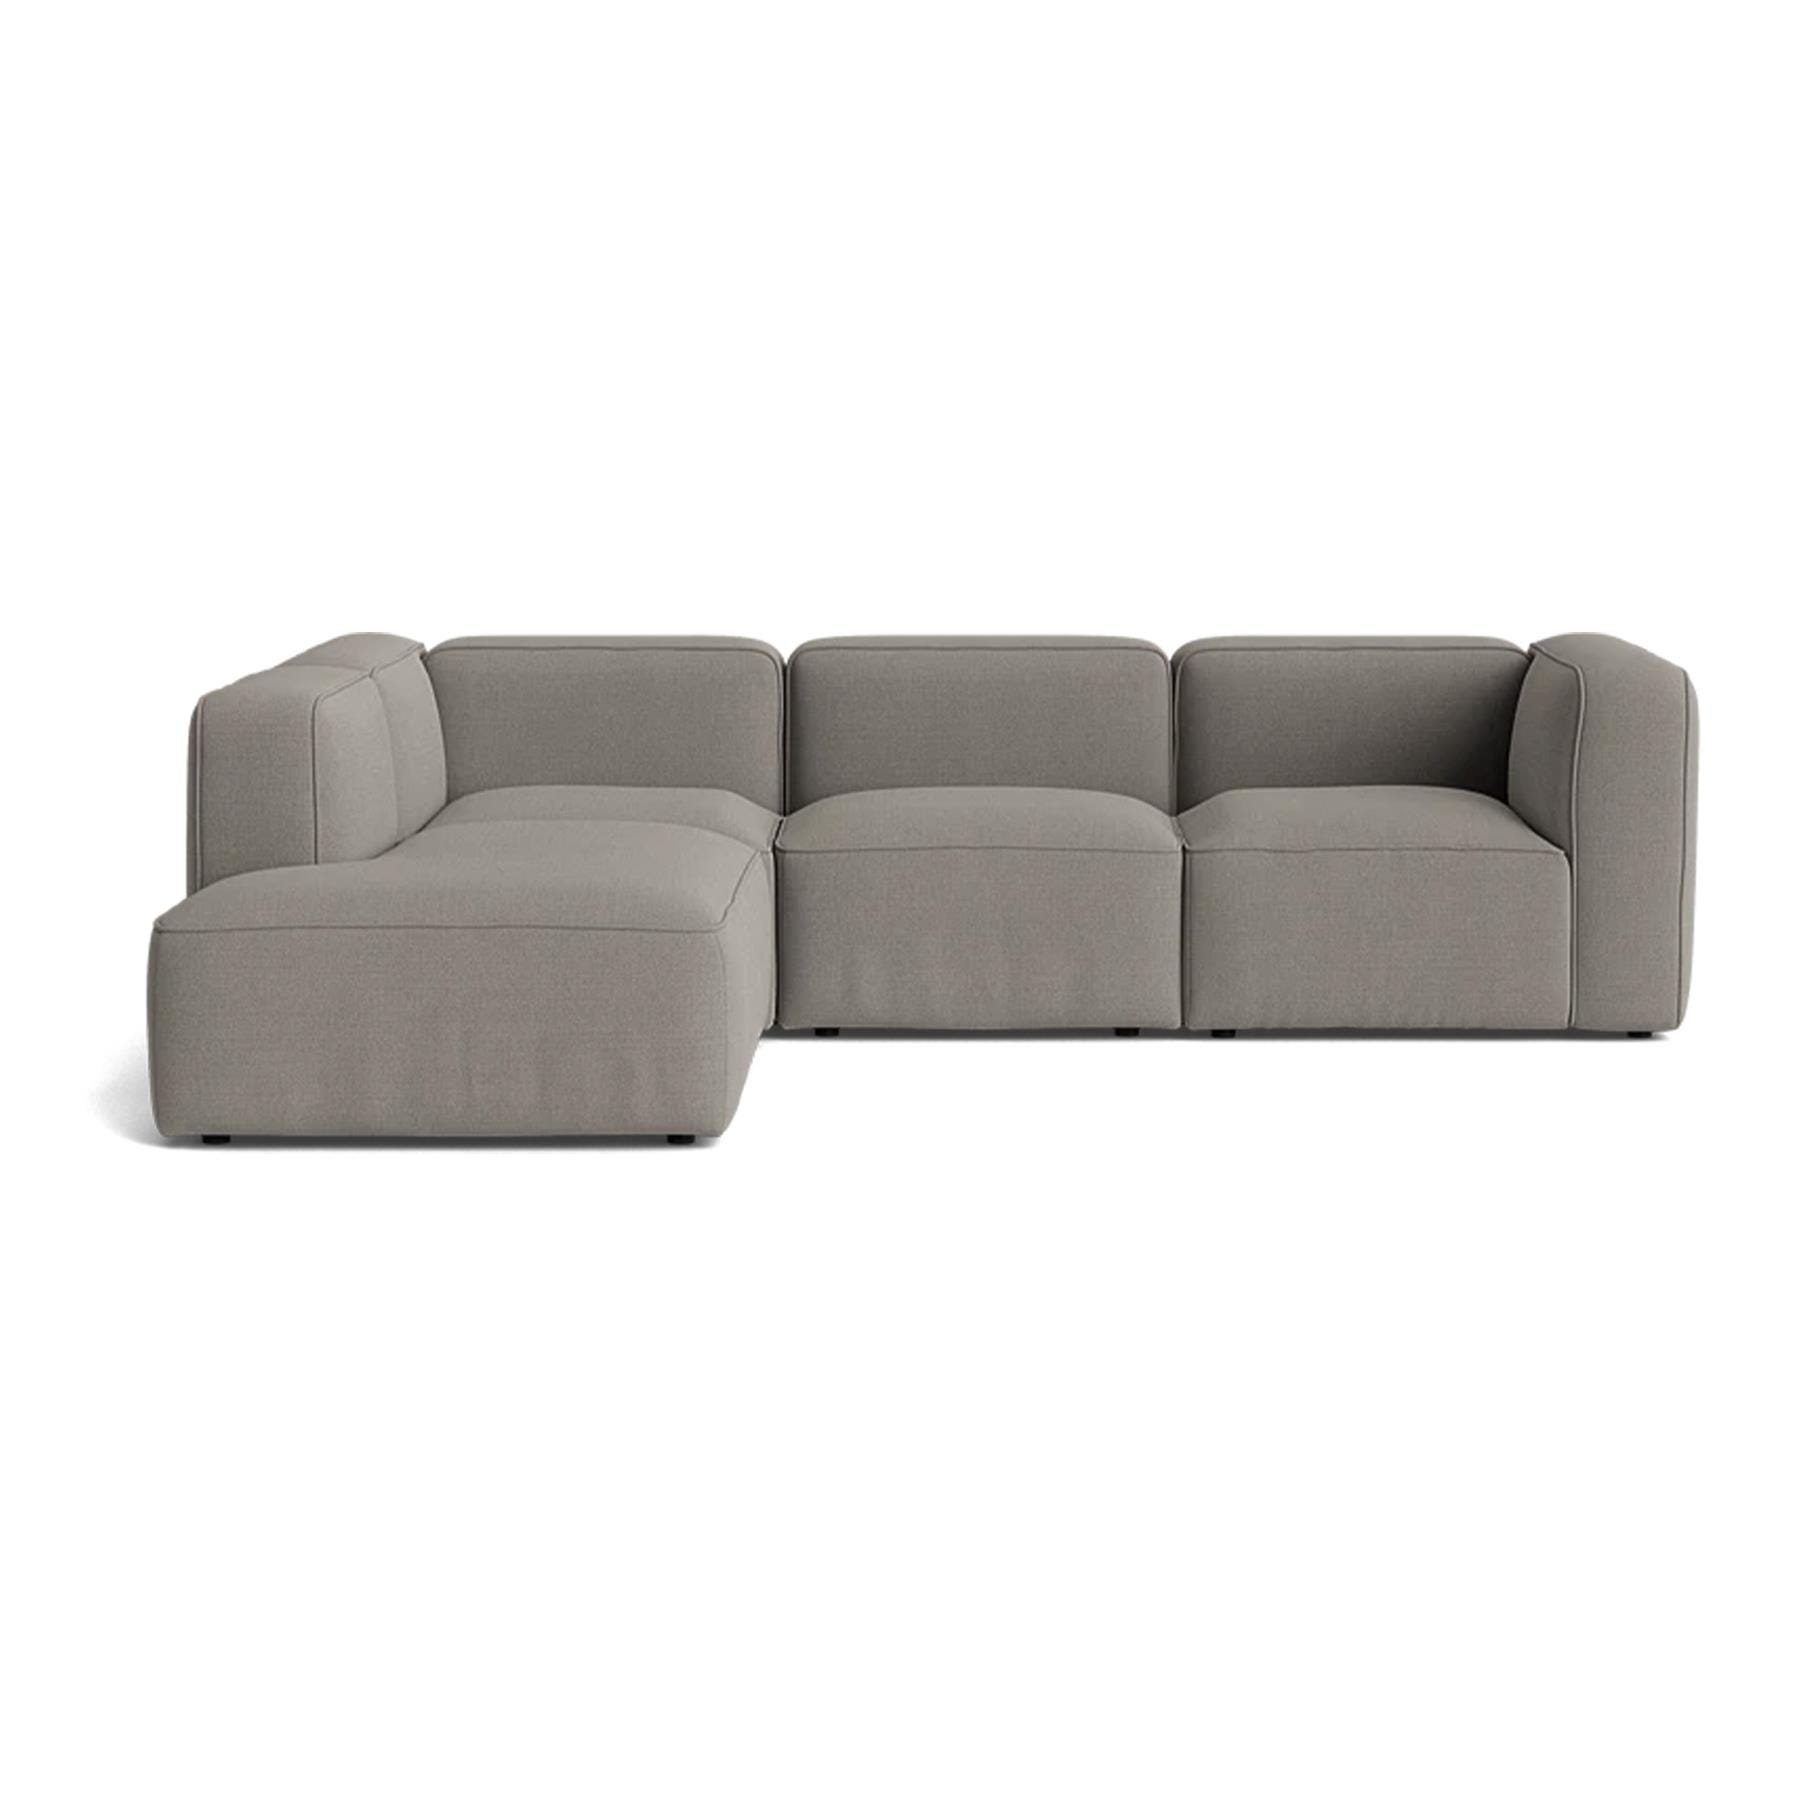 Make Nordic Basecamp Small Family Sofa Fiord 262 Left Brown Designer Furniture From Holloways Of Ludlow